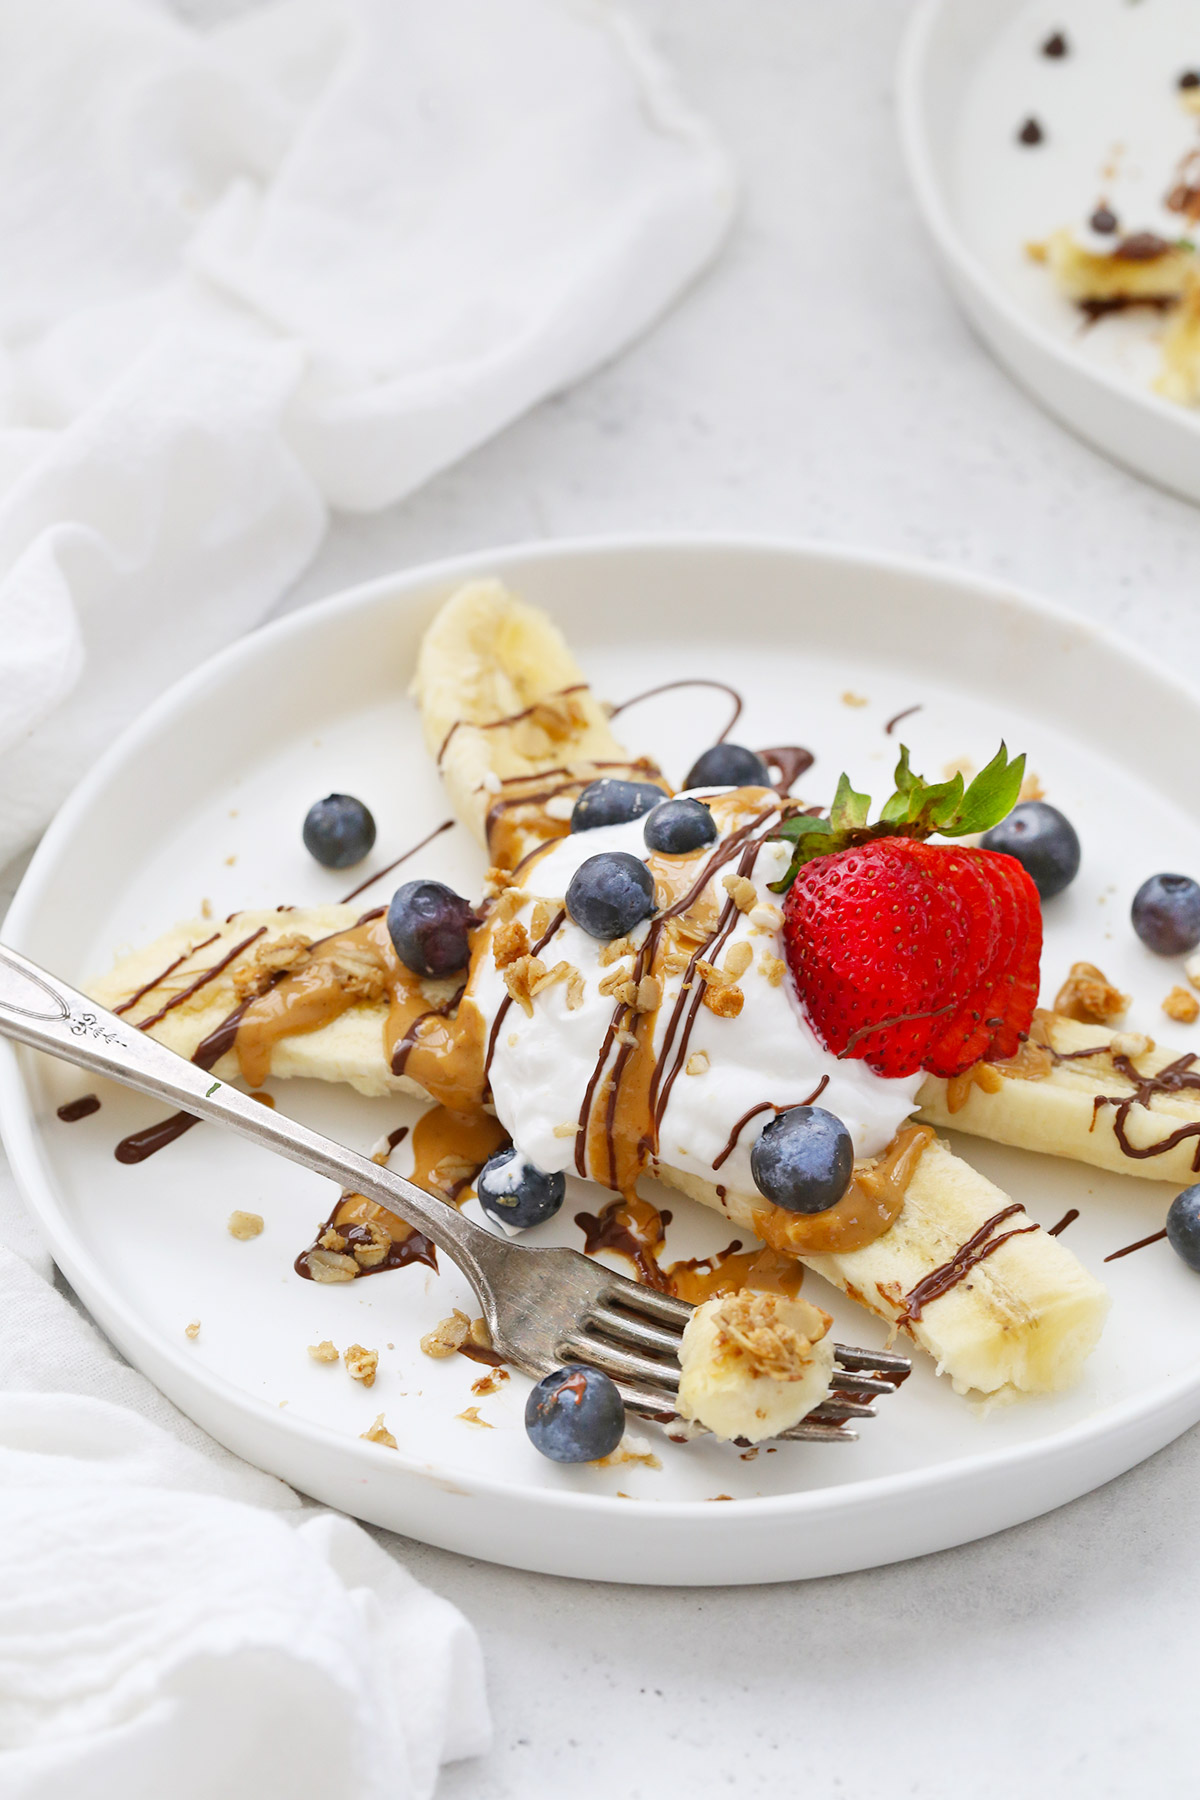 Close-up view of Healthy Banana Split with Yogurt, Peanut Butter, Chocolate, and berries on a white plate